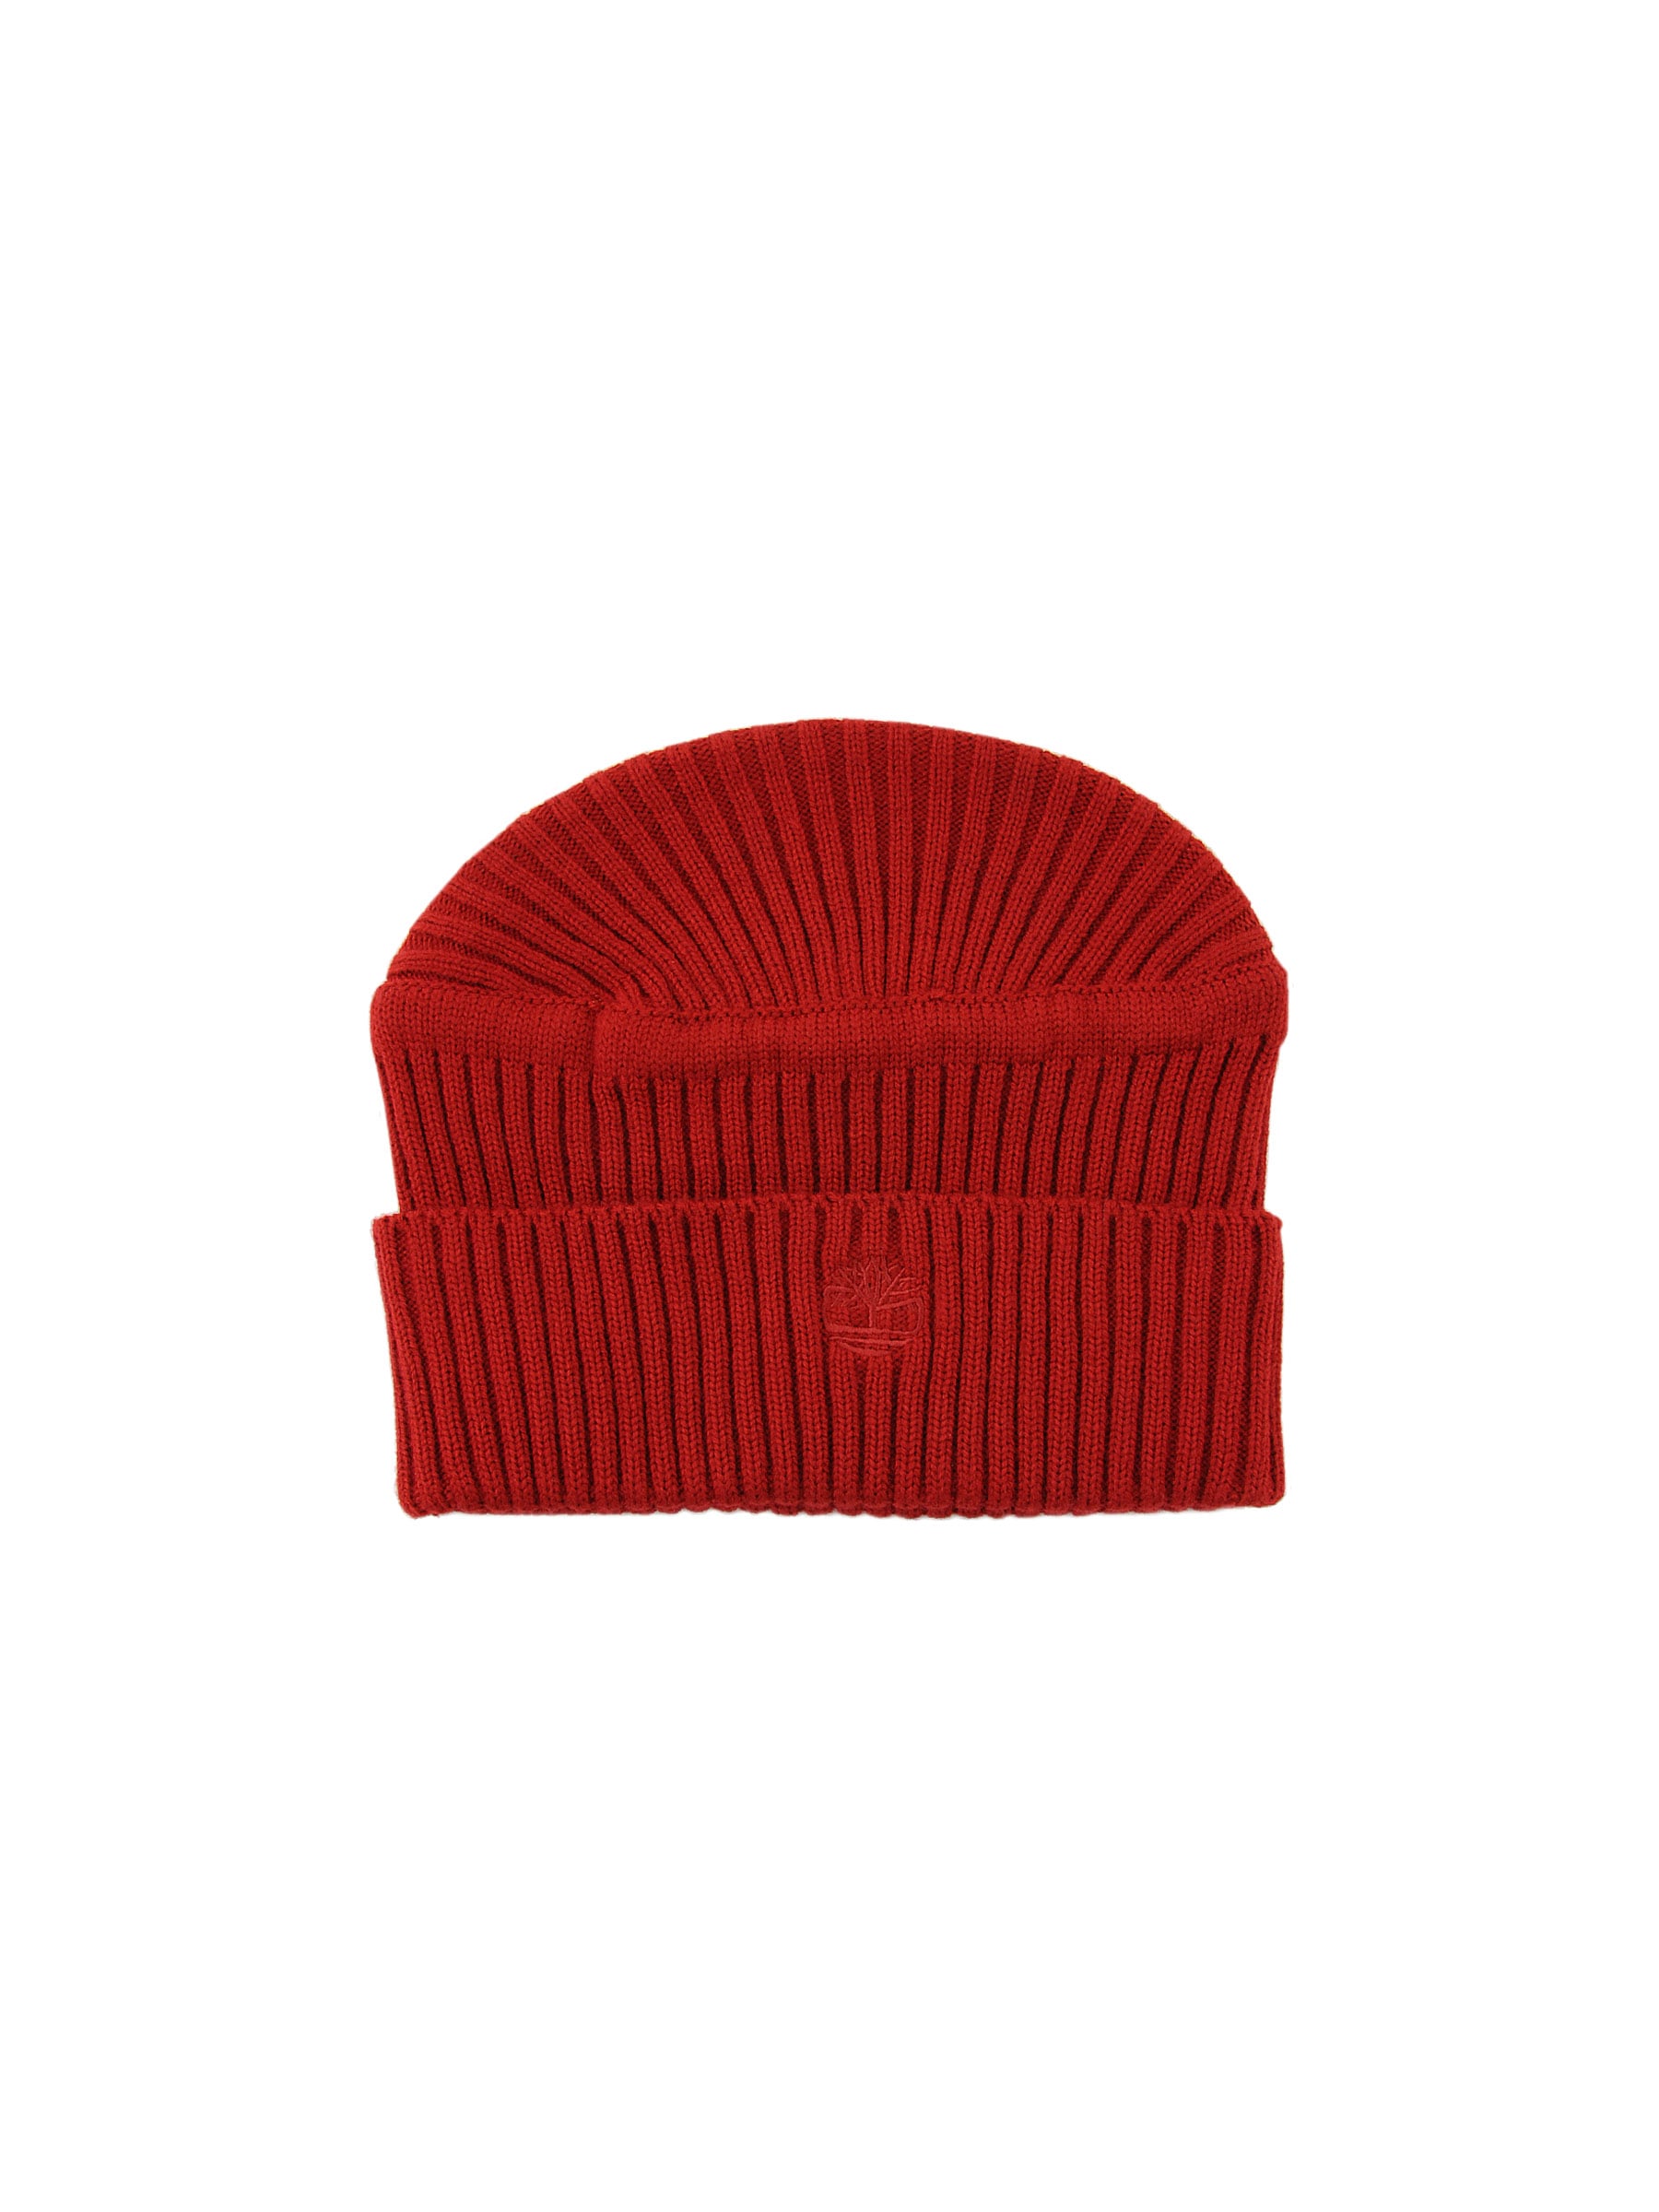 Timberland Unisex Casual Red Skull Caps